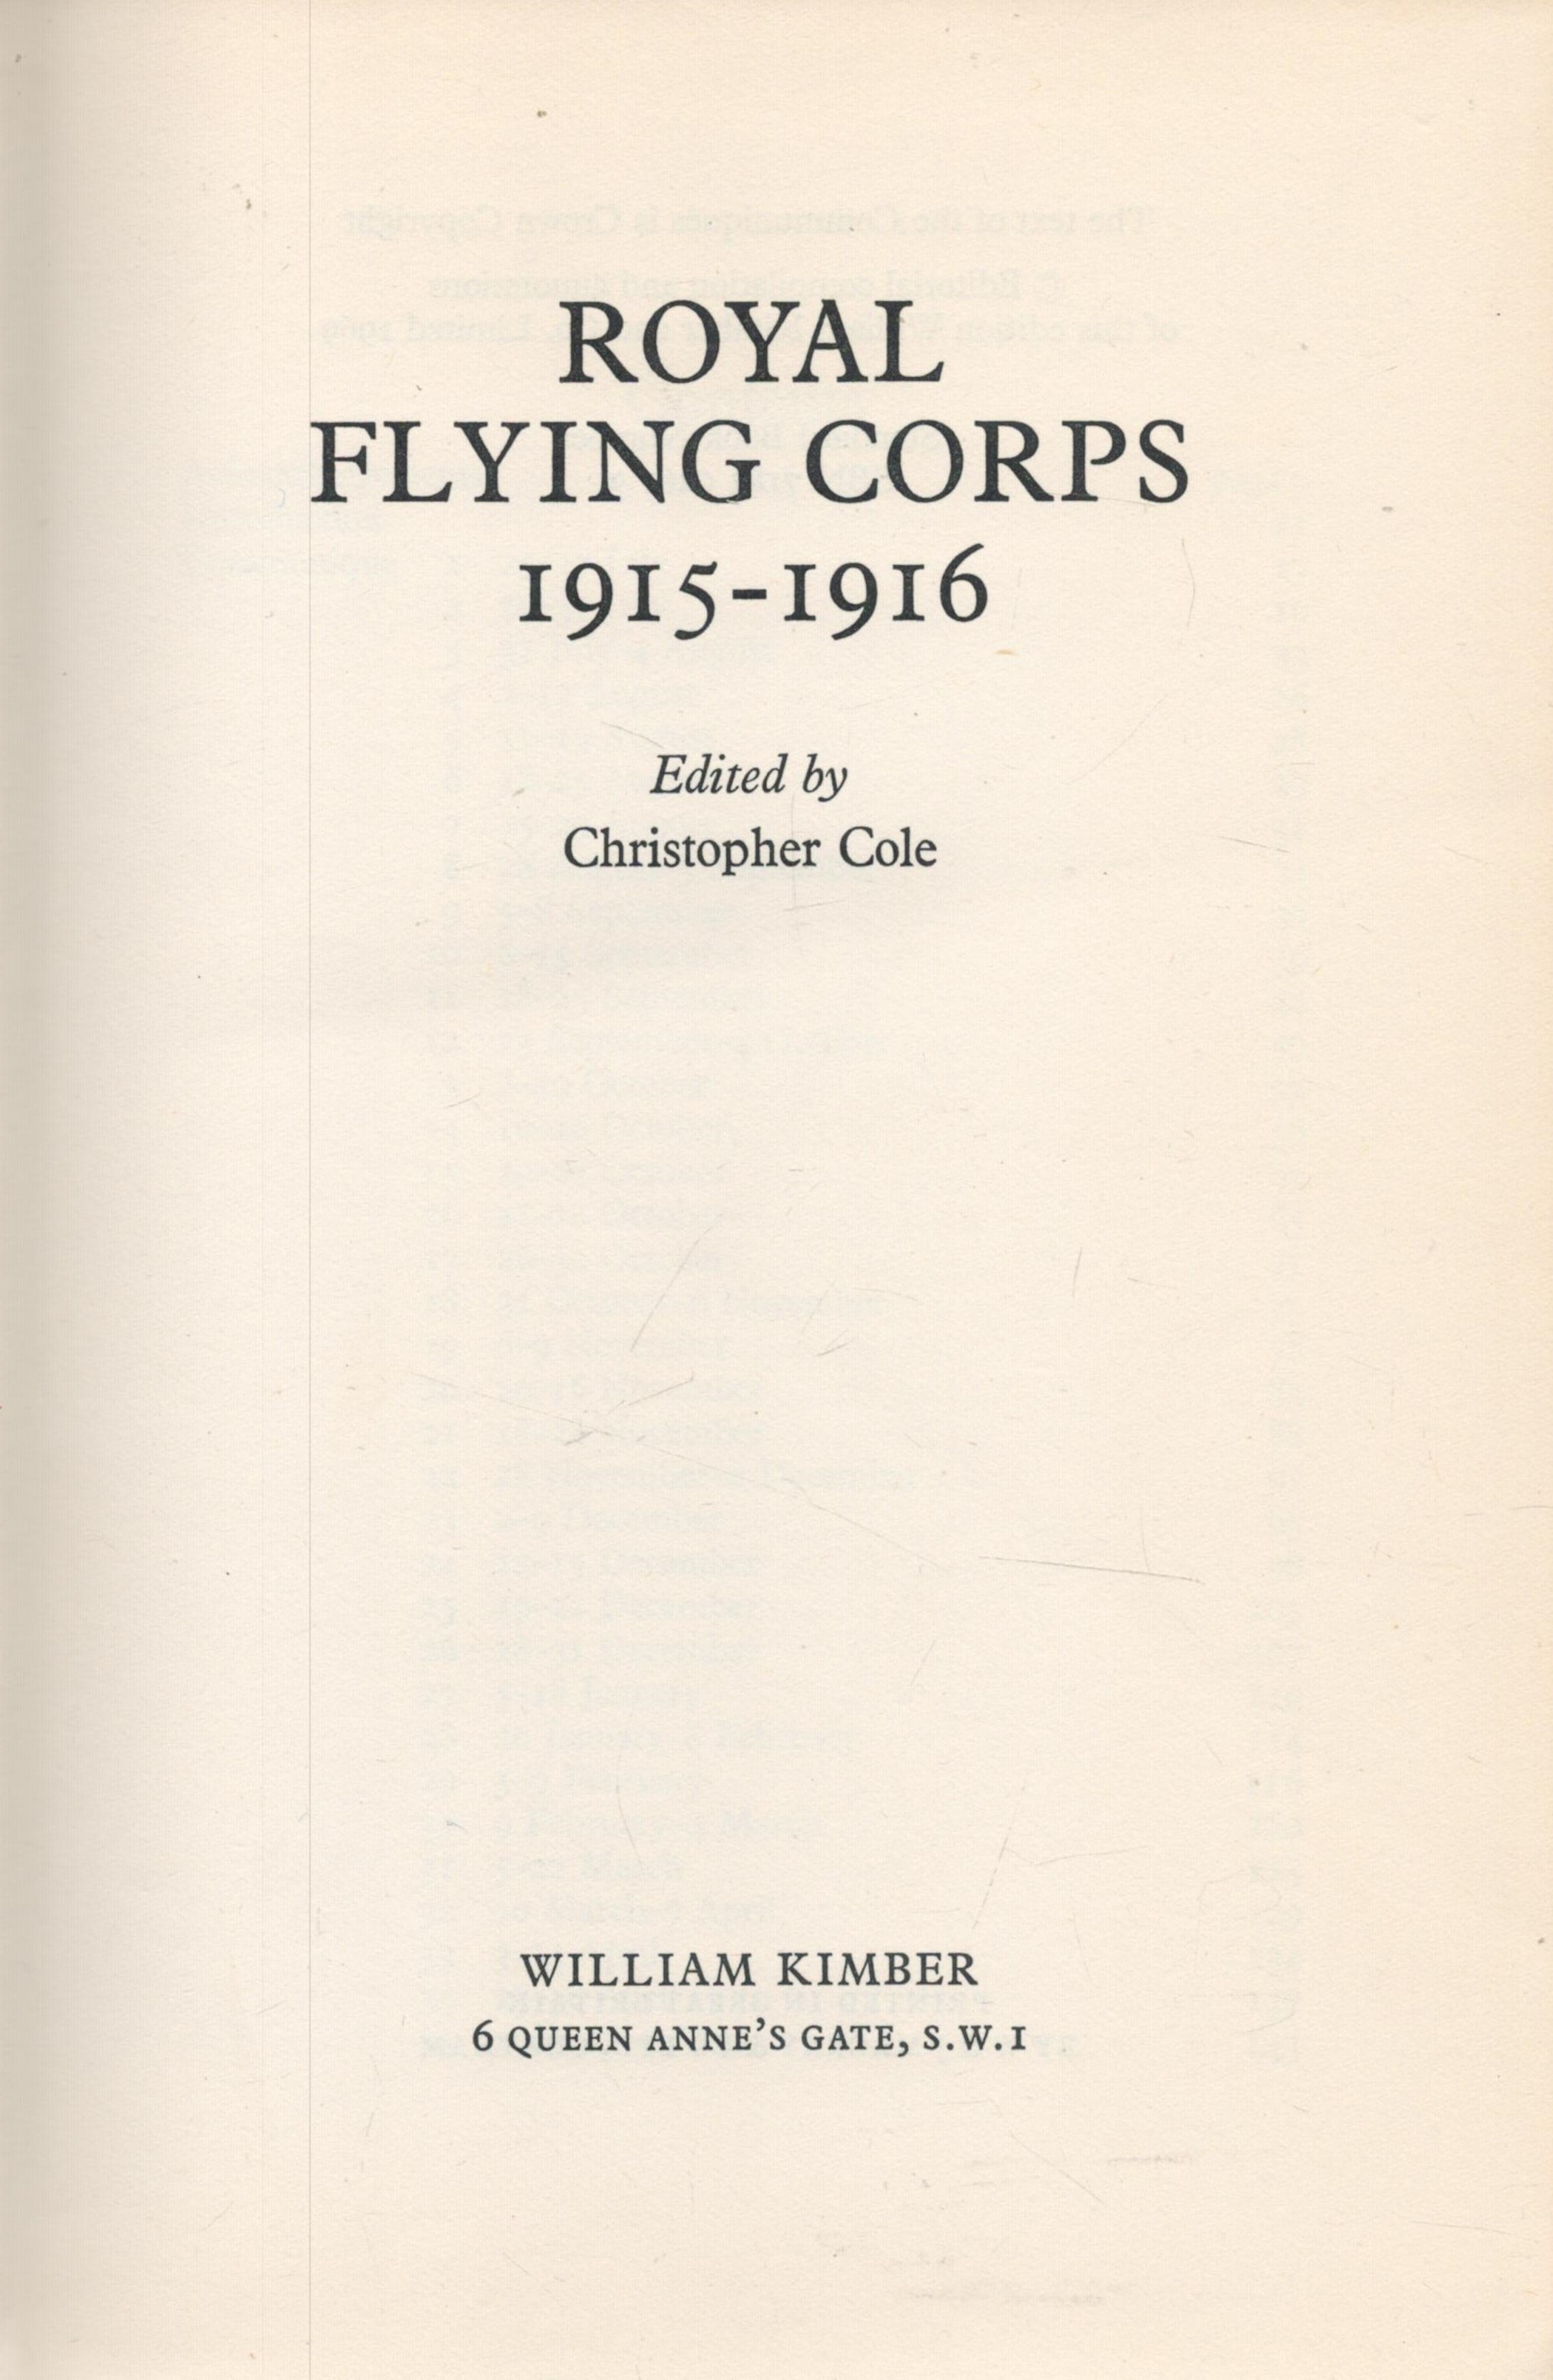 Royal Flying Corps 1915 1916 1st Edition Hardback Book by Christopher Cole. Published in 1969. - Image 2 of 3